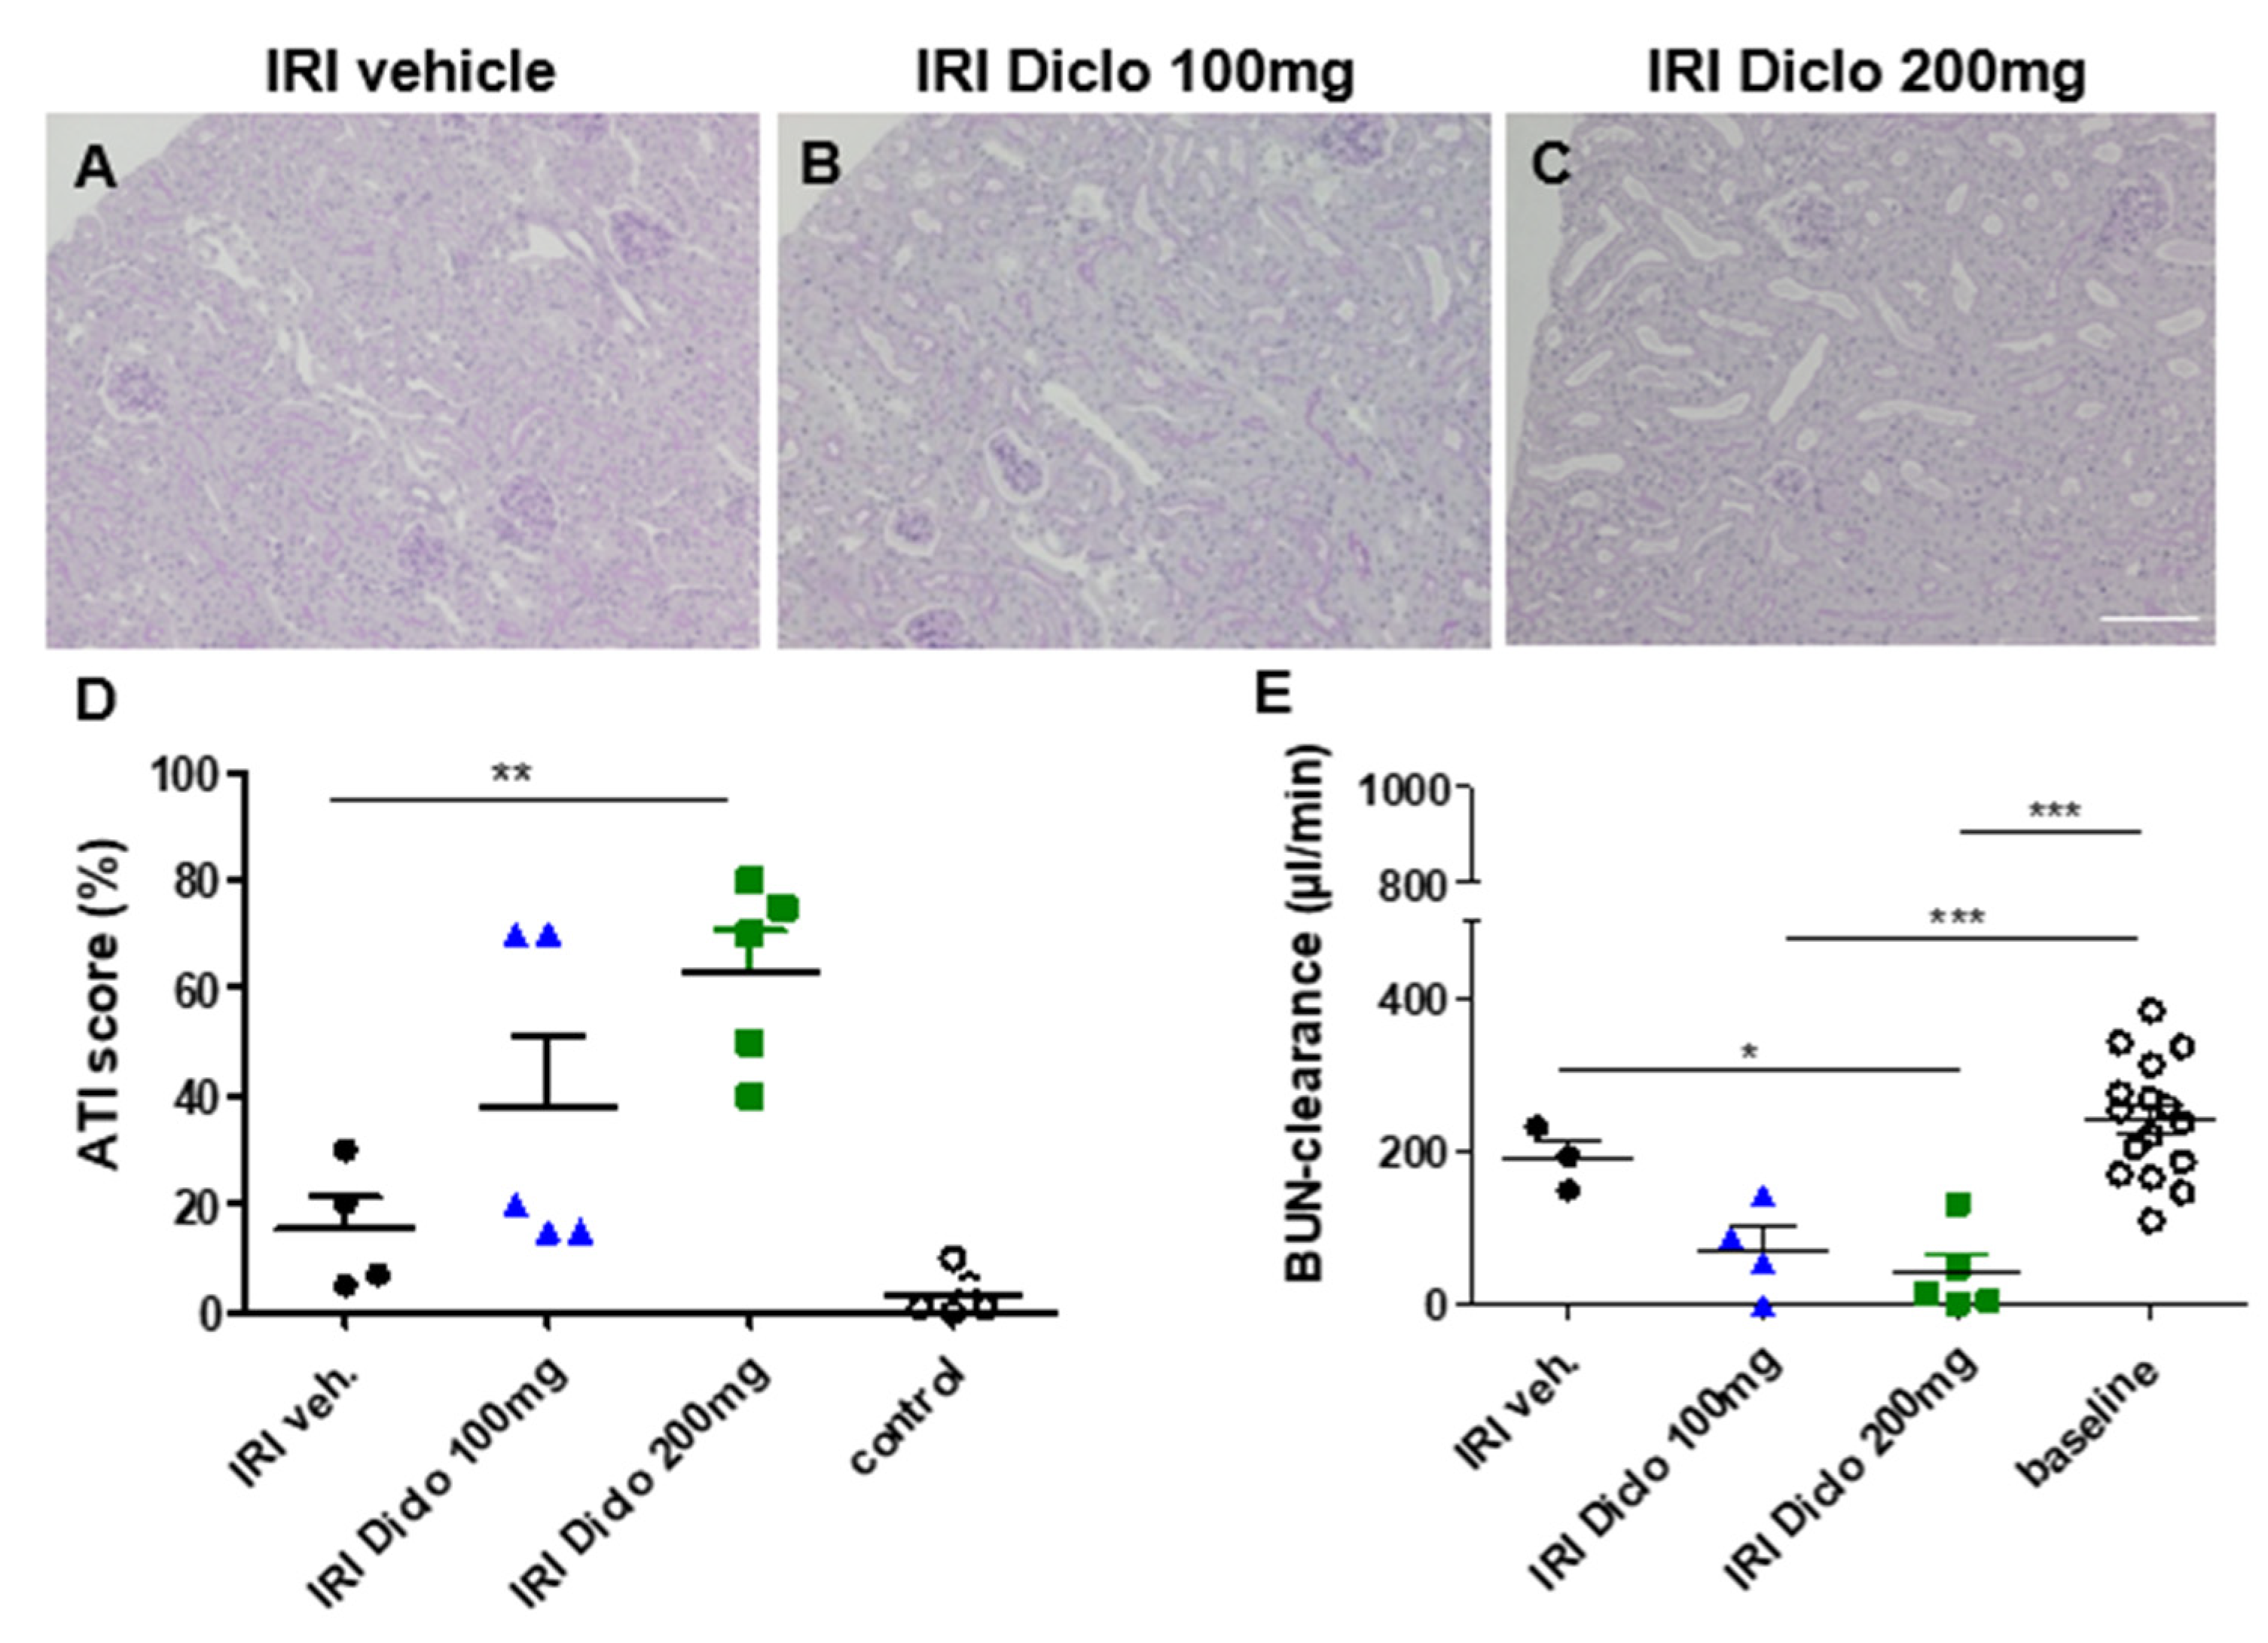 Biomedicines | Free Full-Text | A Single Oral Dose of Diclofenac Causes  Transition of Experimental Subclinical Acute Kidney Injury to Chronic  Kidney Disease